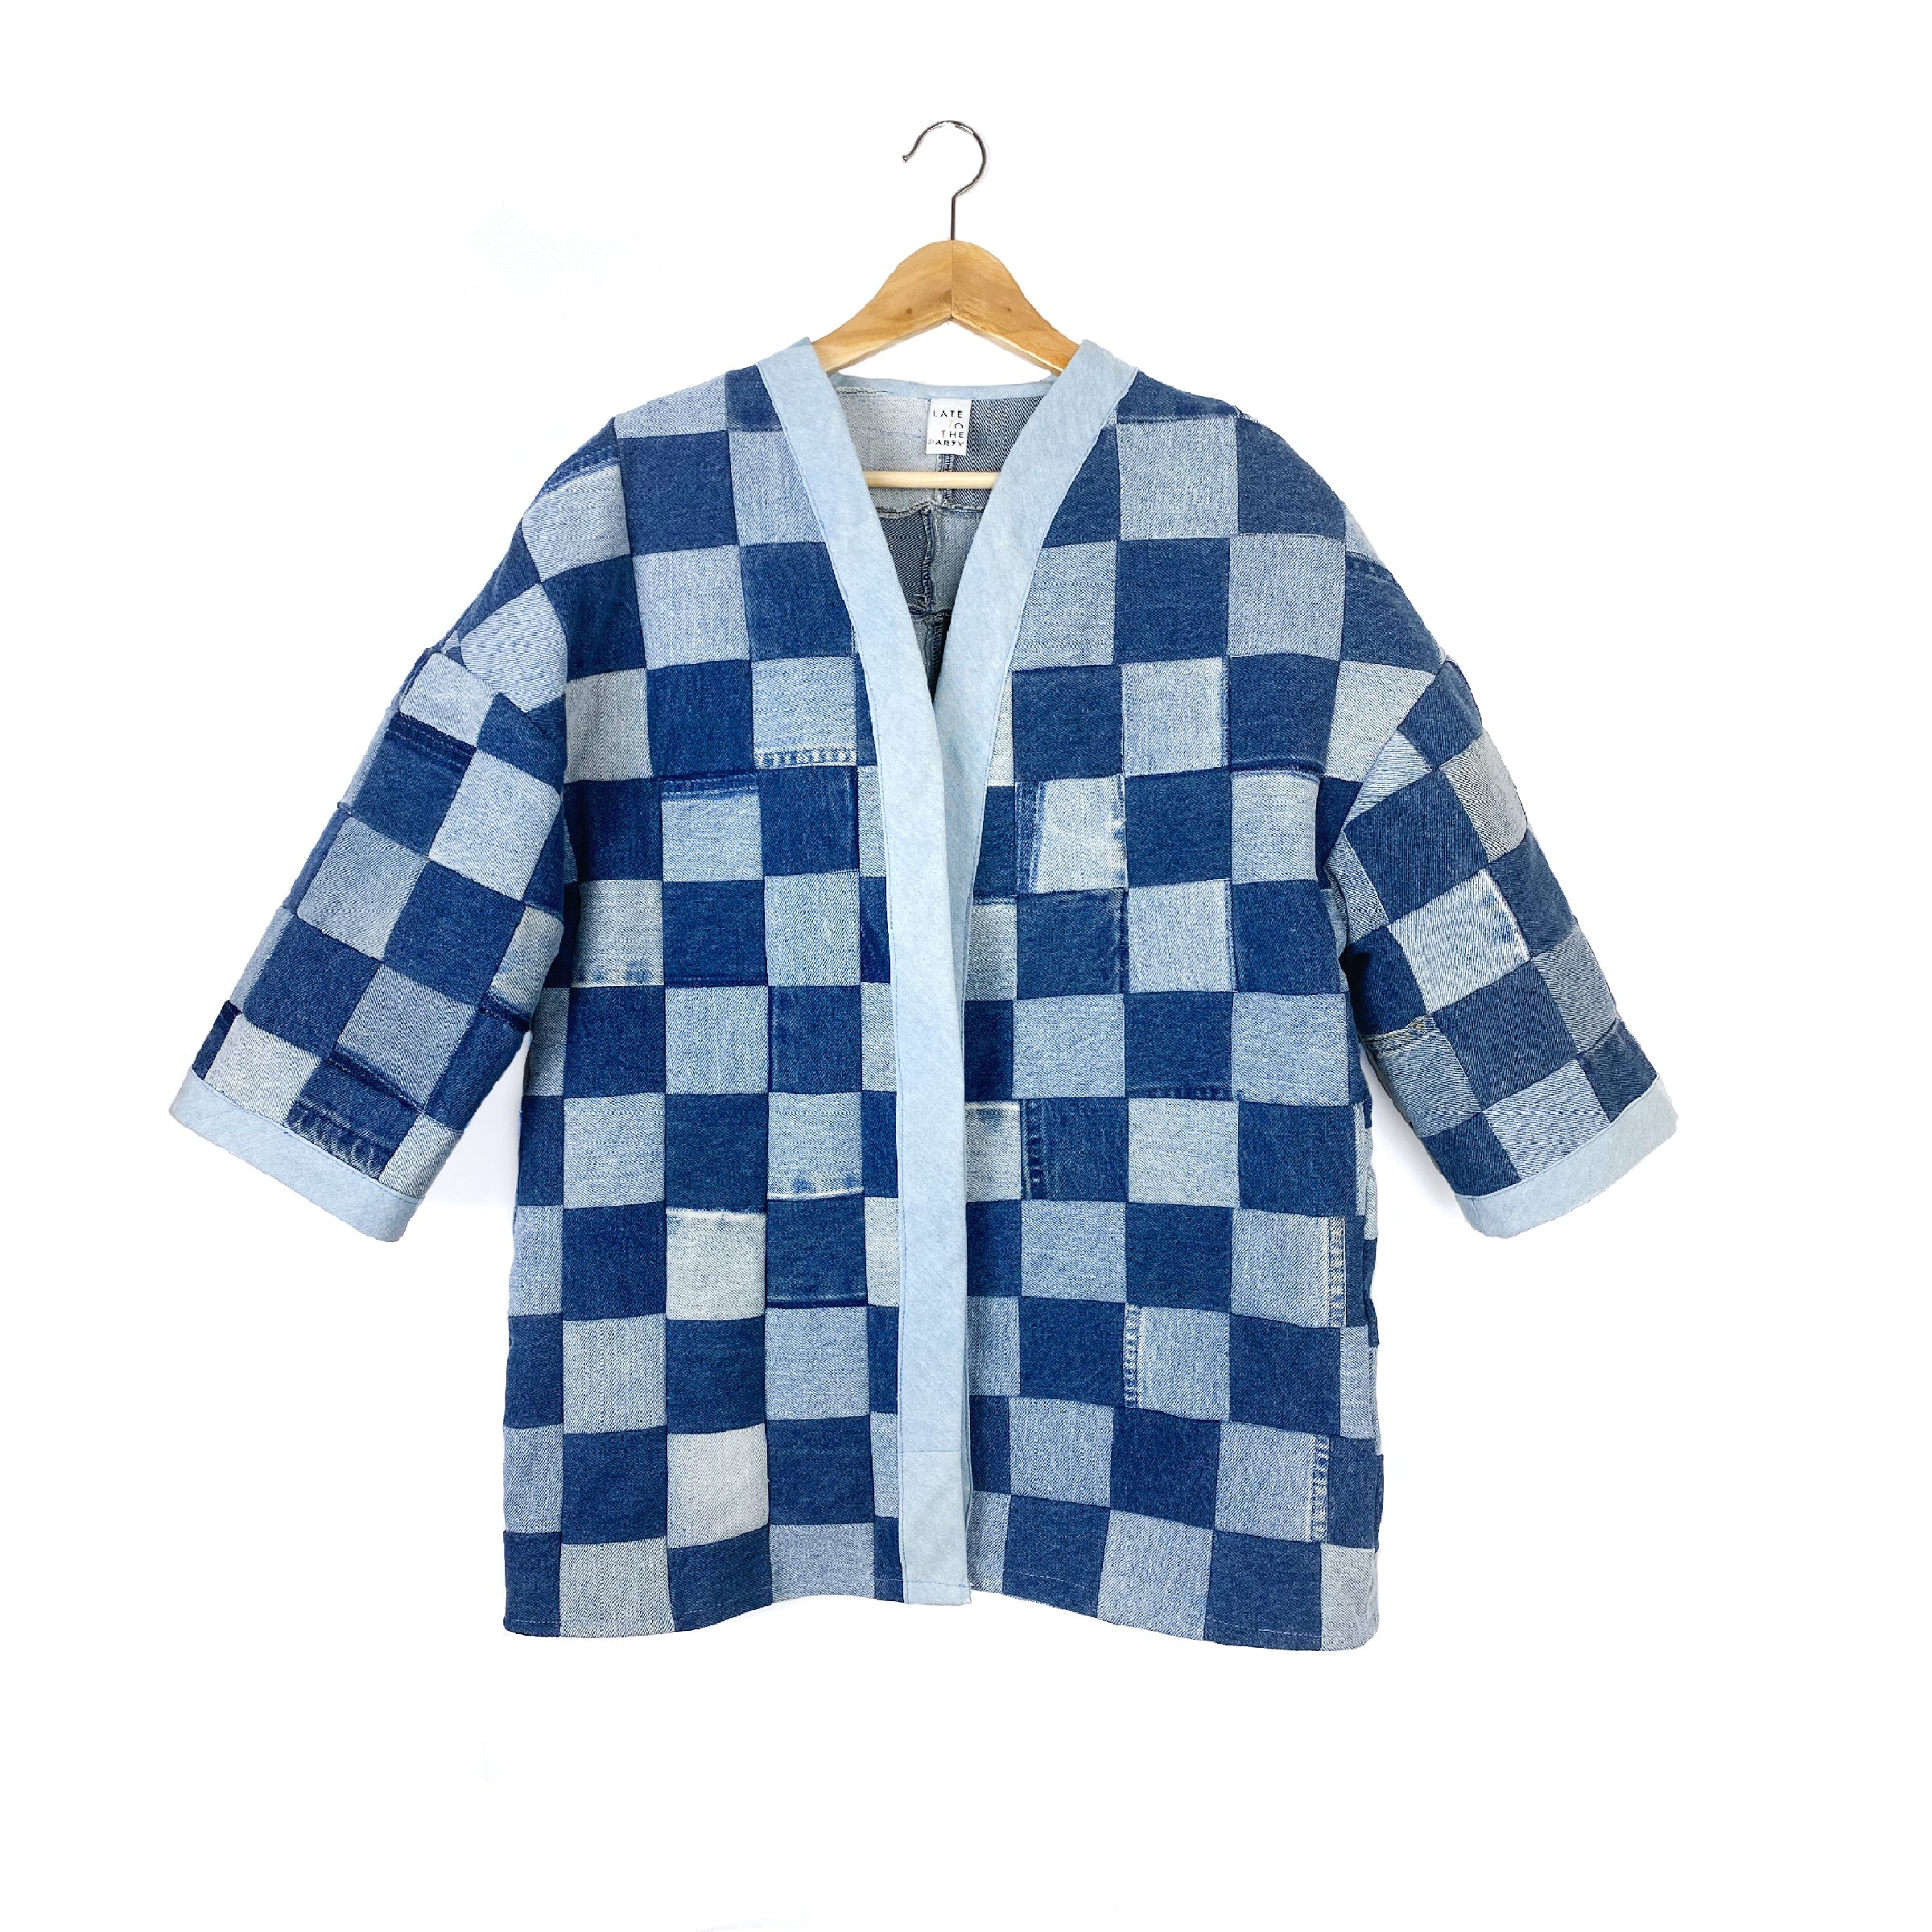 "Patchwork Checkerboard" Denim  Lounger Jacket - Late to the Party